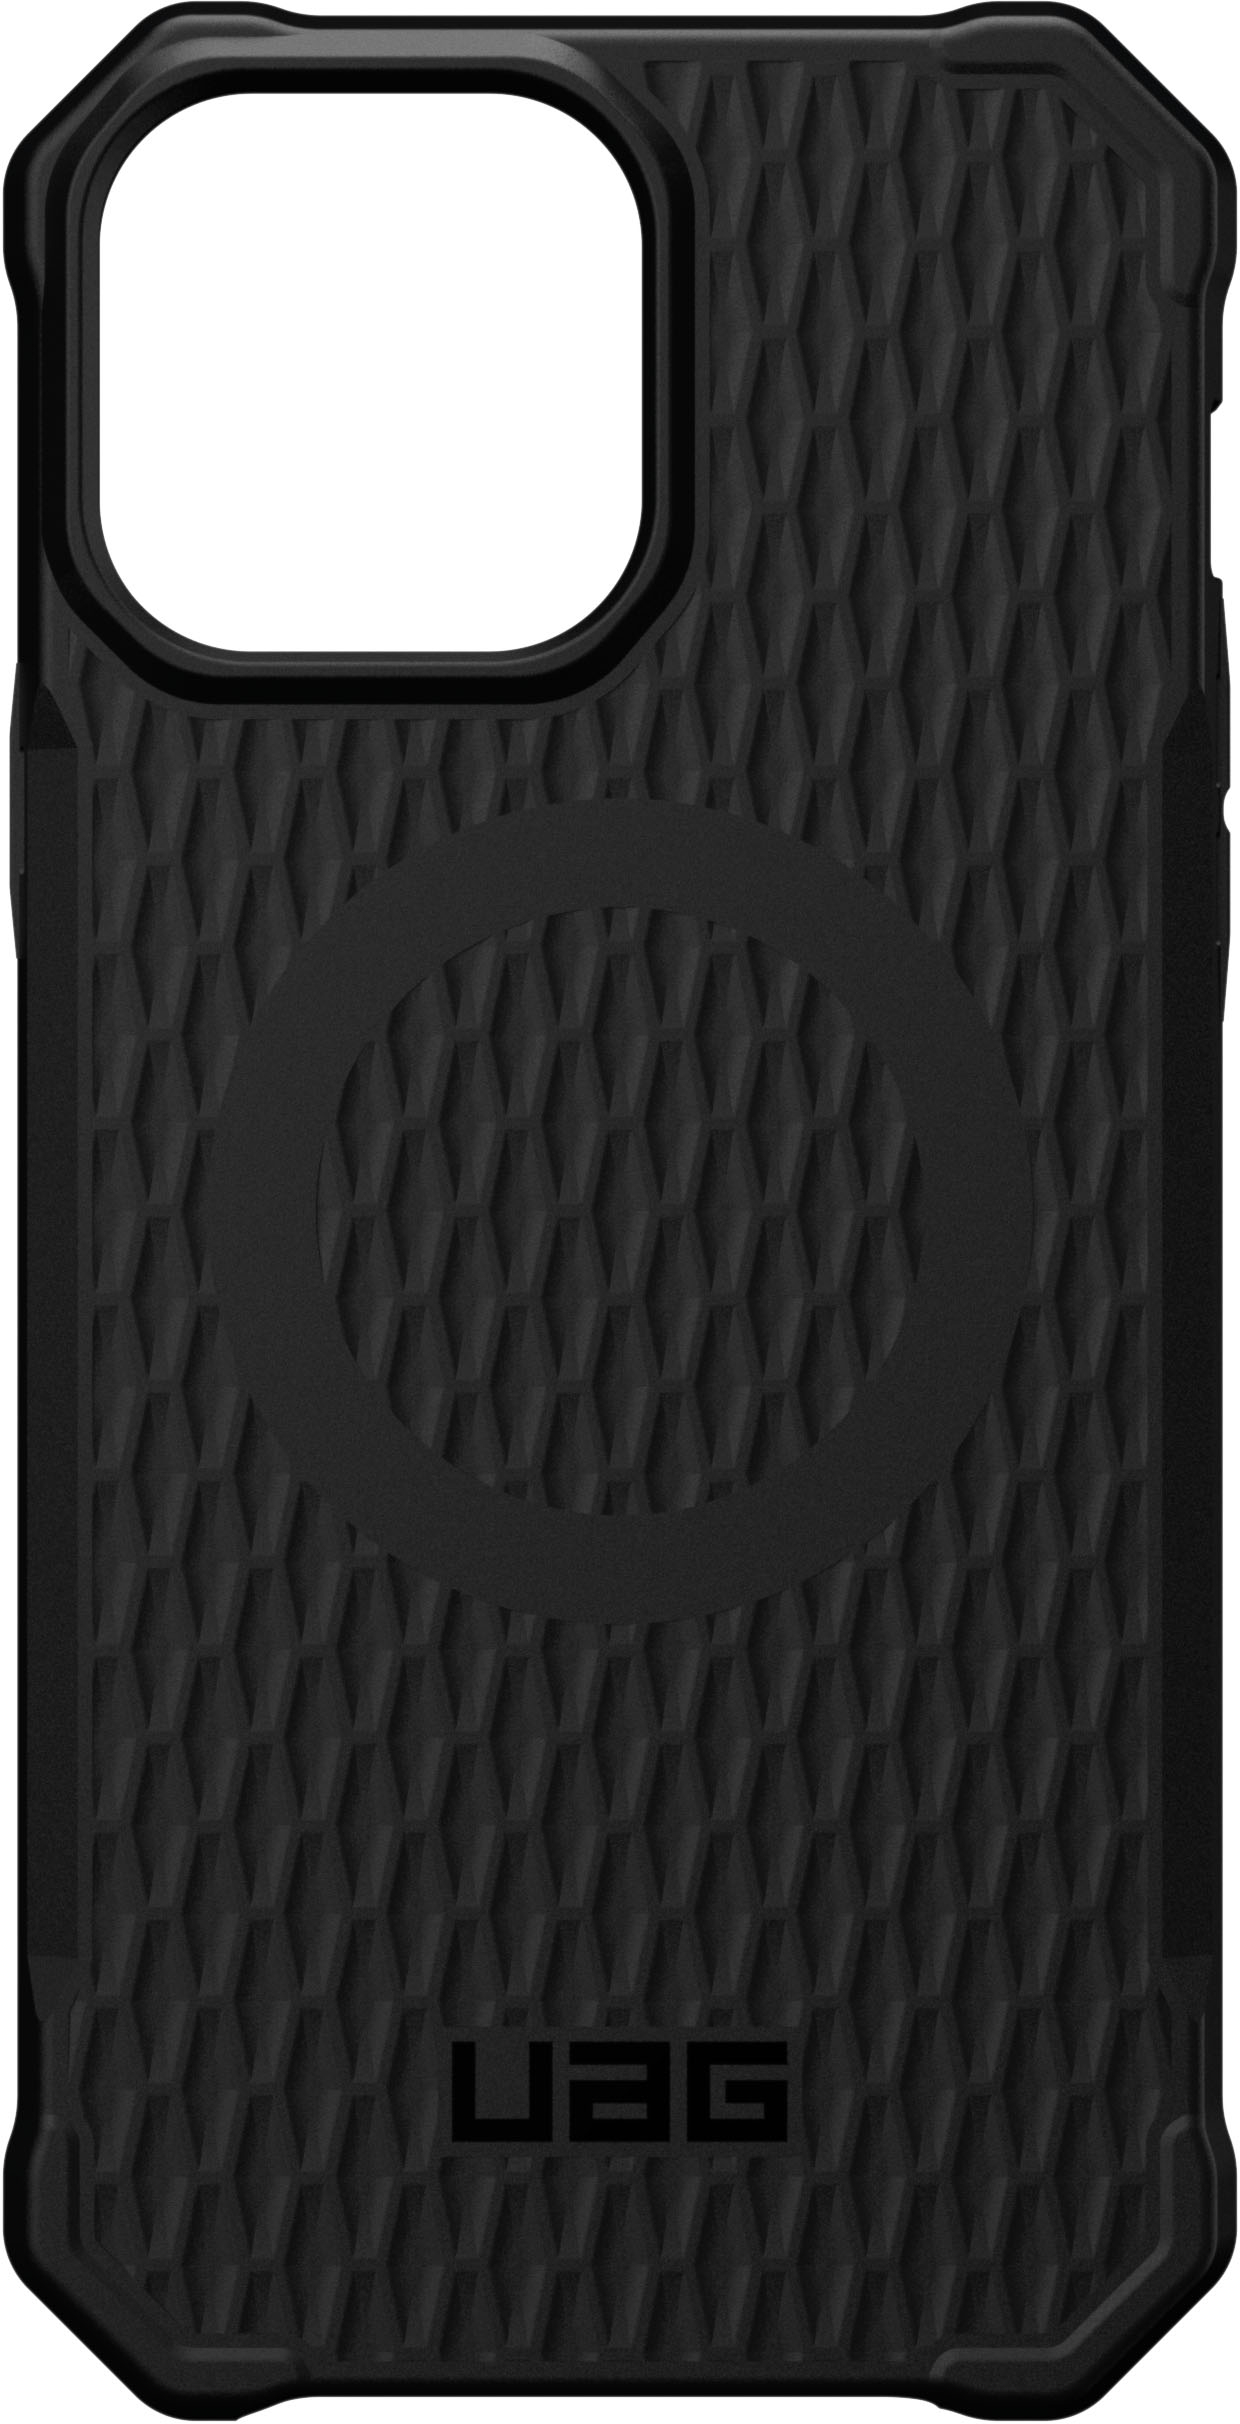 Angle View: UAG - Civilian Series Hard shell Case for iPhone 12 Pro Max - Olive